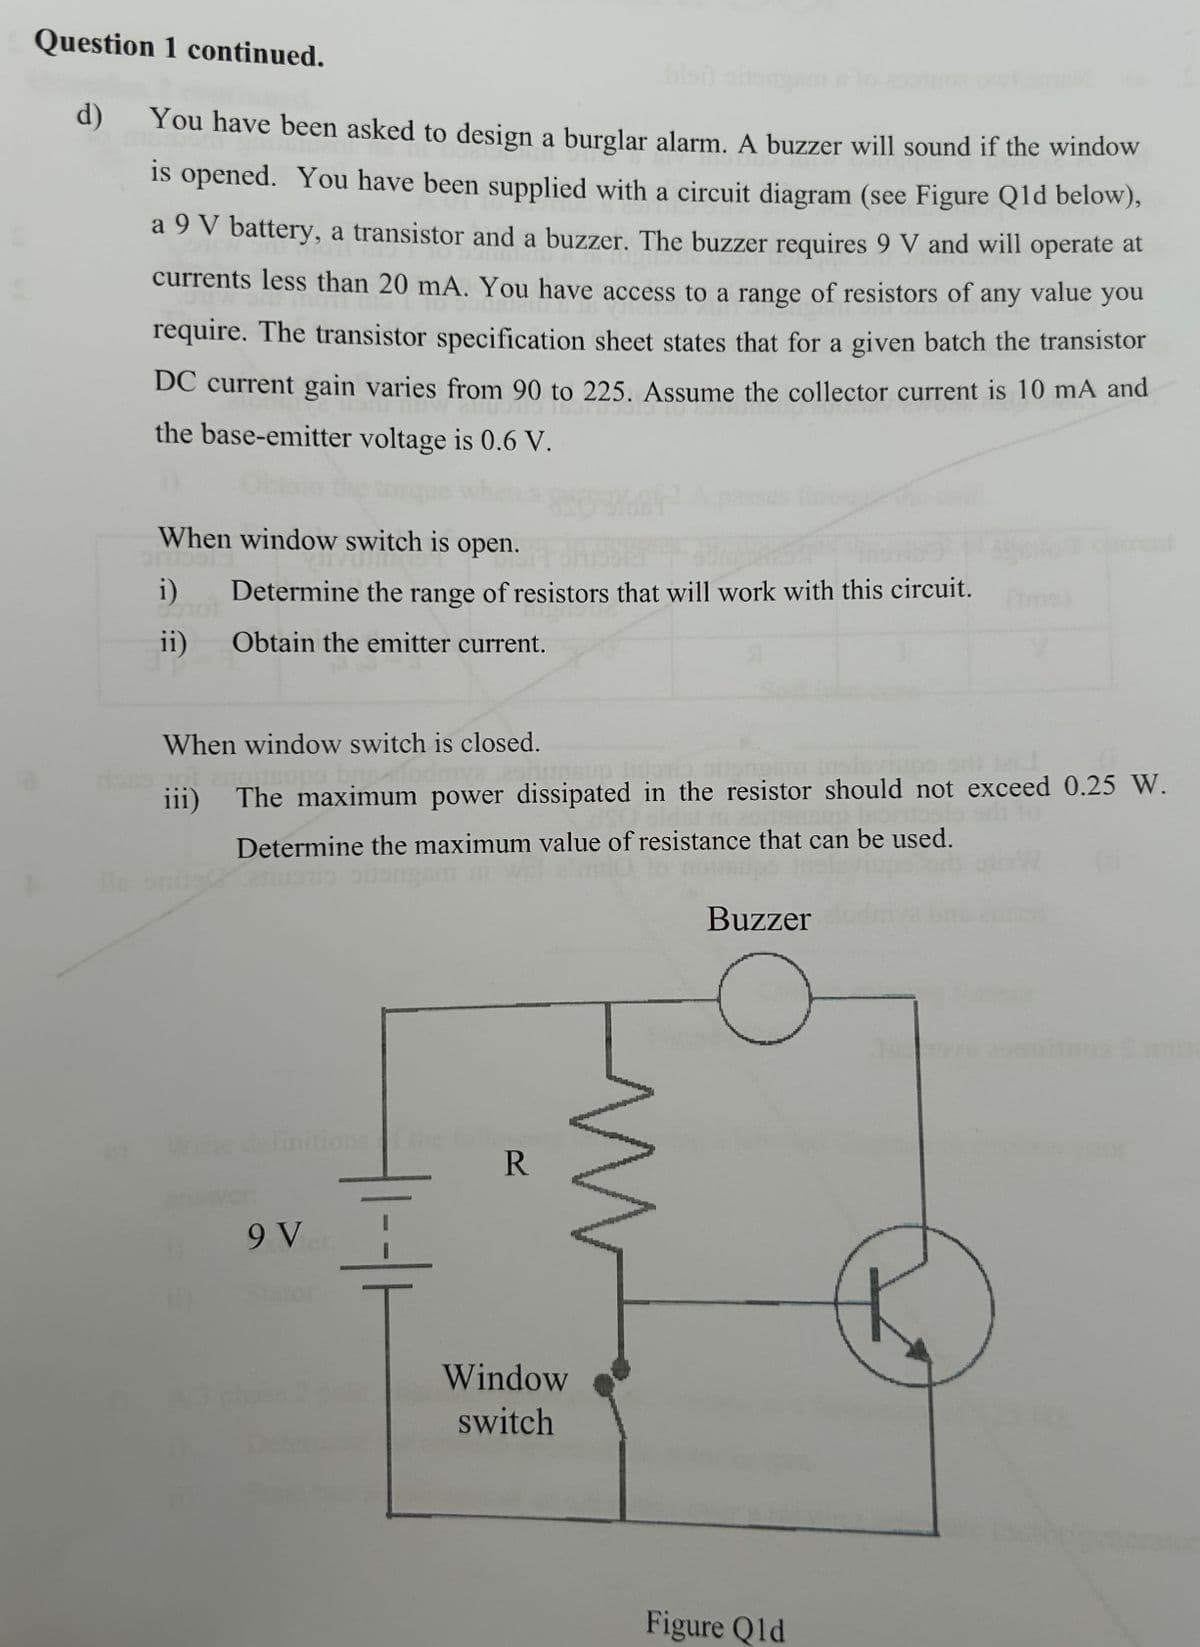 Question 1 continued.
d)
blon
You have been asked to design a burglar alarm. A buzzer will sound if the window
is opened. You have been supplied with a circuit diagram (see Figure Qld below),
a 9 V battery, a transistor and a buzzer. The buzzer requires 9 V and will operate at
currents less than 20 mA. You have access to a range of resistors of any value you
require. The transistor specification sheet states that for a given batch the transistor
DC current gain varies from 90 to 225. Assume the collector current is 10 mA and
the base-emitter voltage is 0.6 V.
When window switch is open.
i)
Determine the range of resistors that will work with this circuit. (ms)
ii) Obtain the emitter current.
Я
When window switch is closed.
iii) The maximum power dissipated in the resistor should not exceed 0.25 W.
Determine the maximum value of resistance that can be used.
definitions of the foll
9 Vier.
Stato
R
Window
switch
Buzzer
Figure Qld